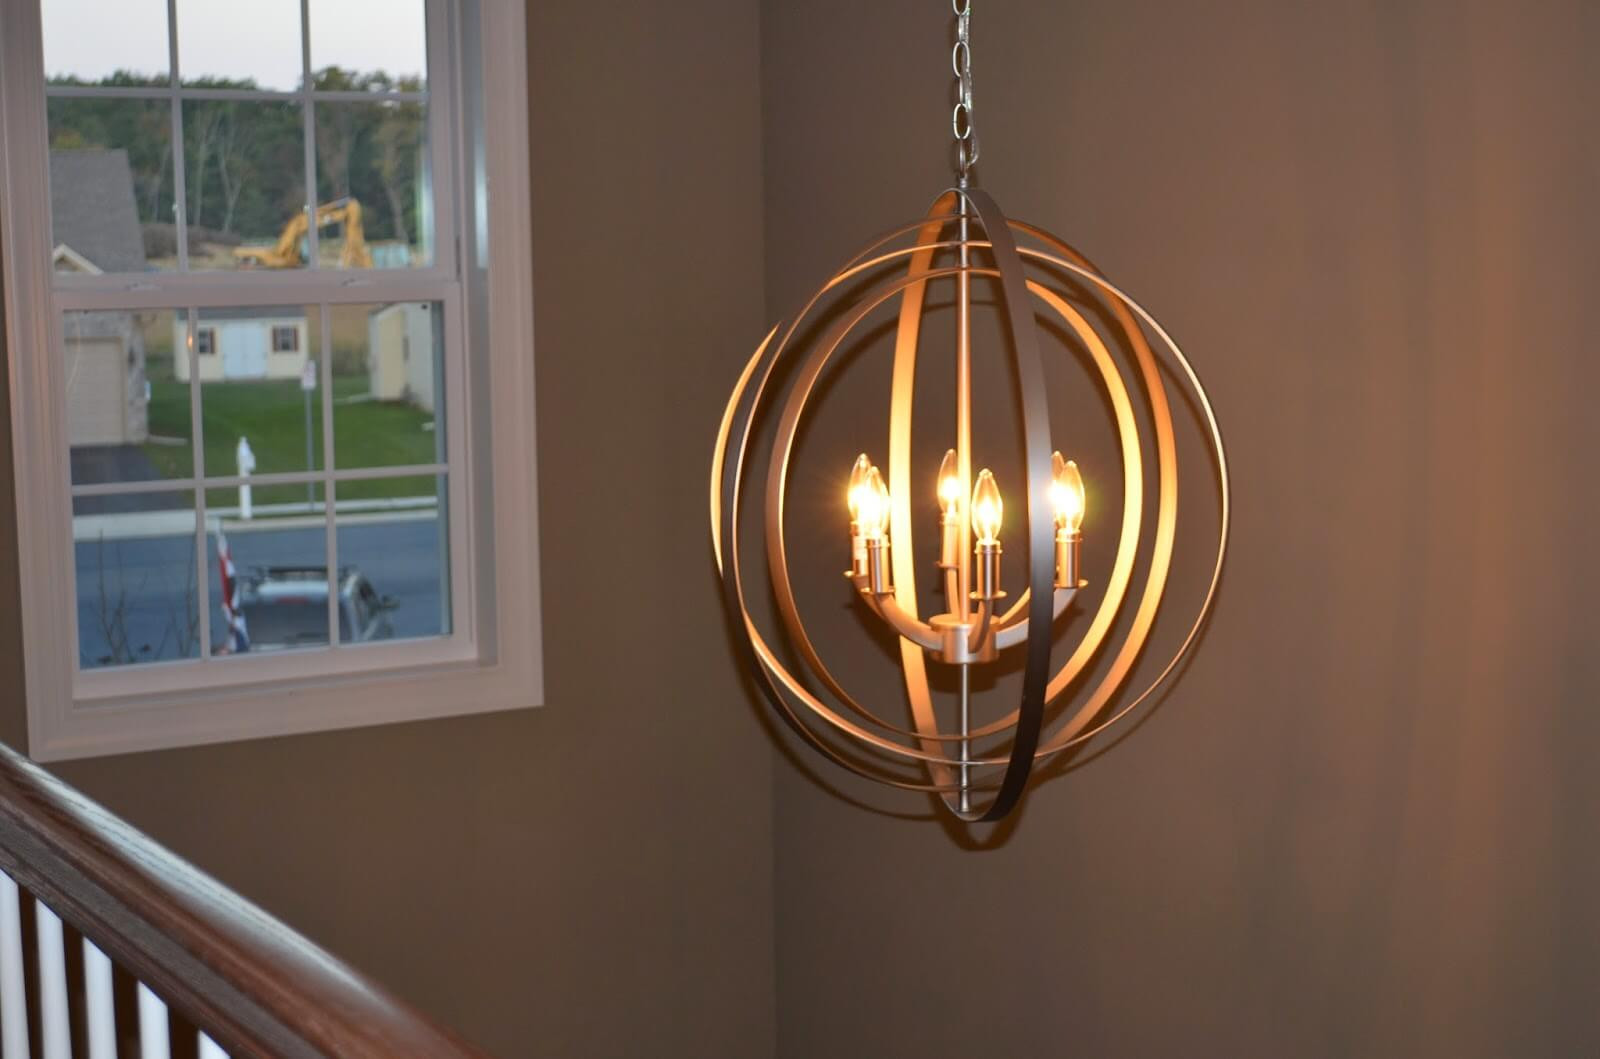 The Best Entryway Lights Fixtures - Best Collections Ever | Home Decor